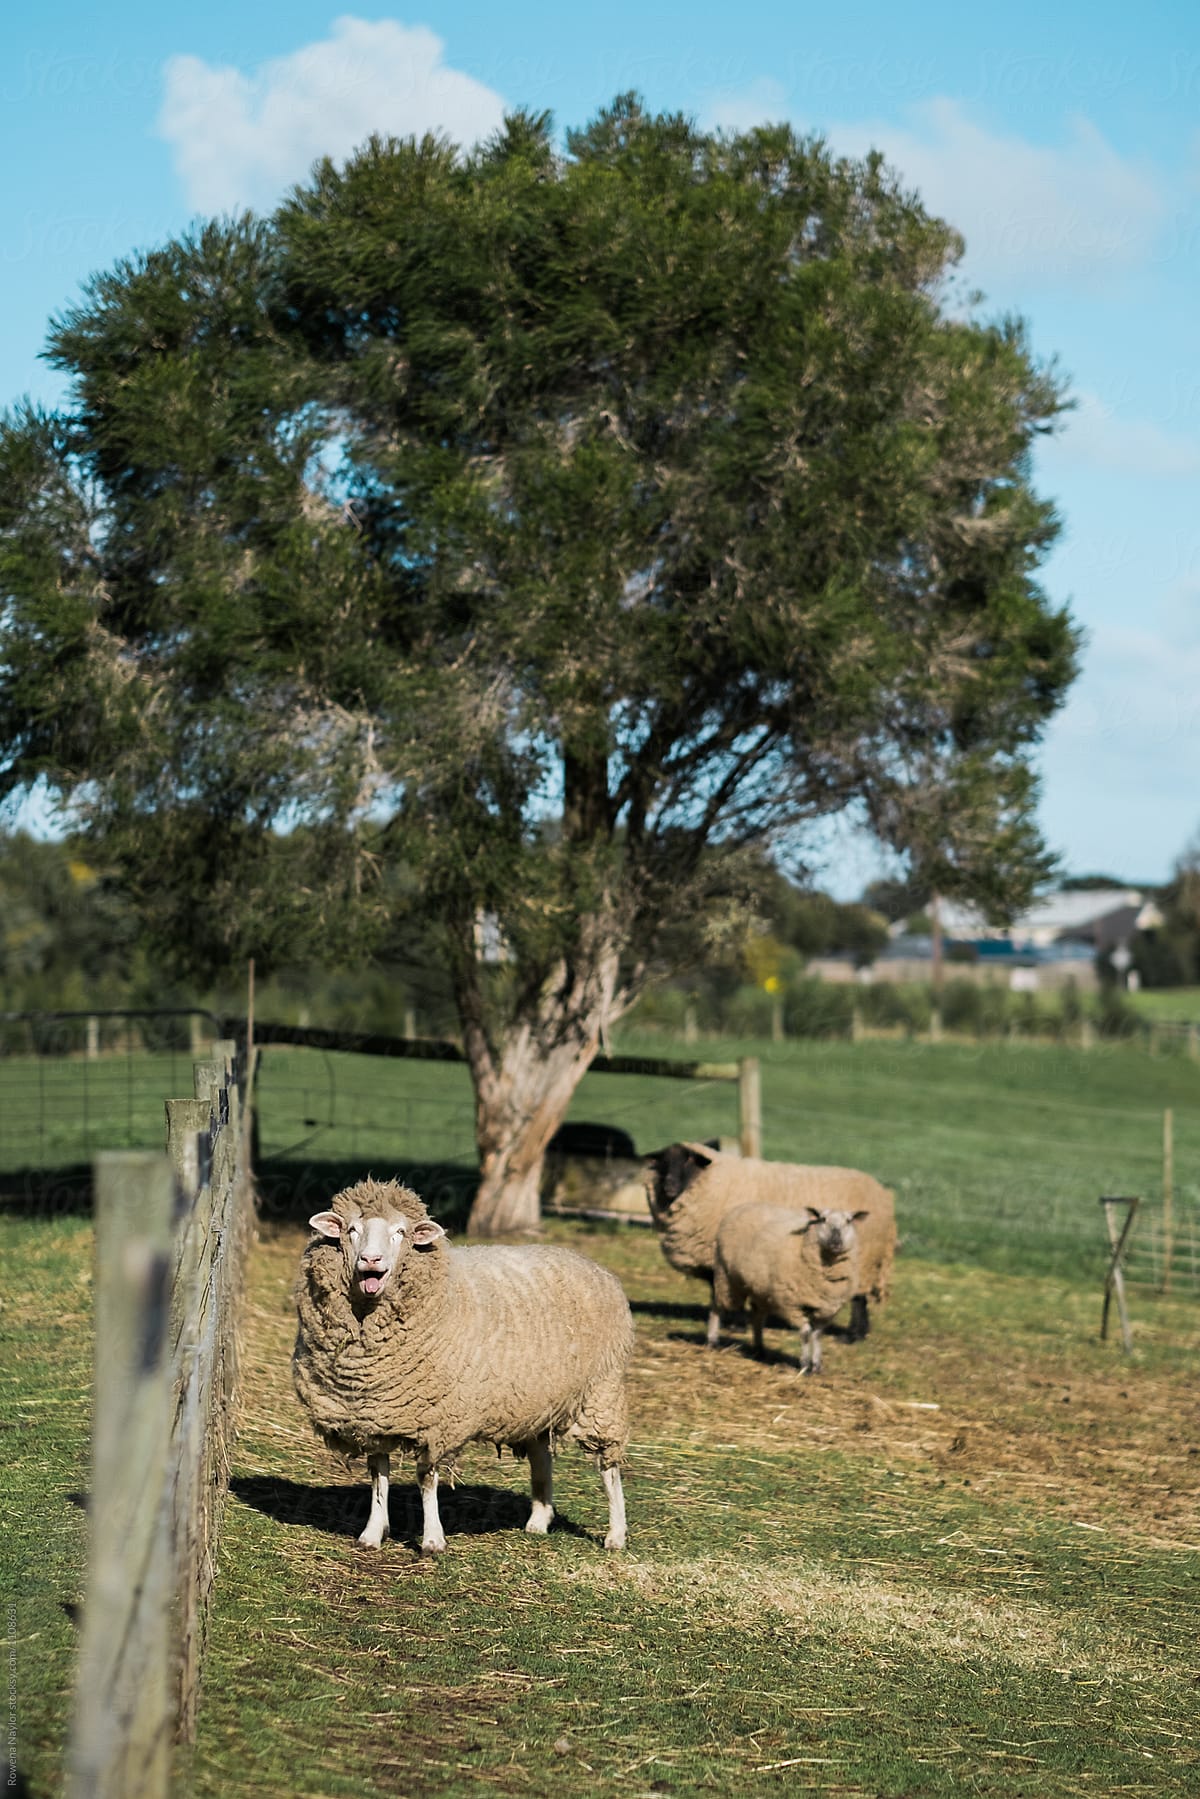 Ram with sheep in paddock